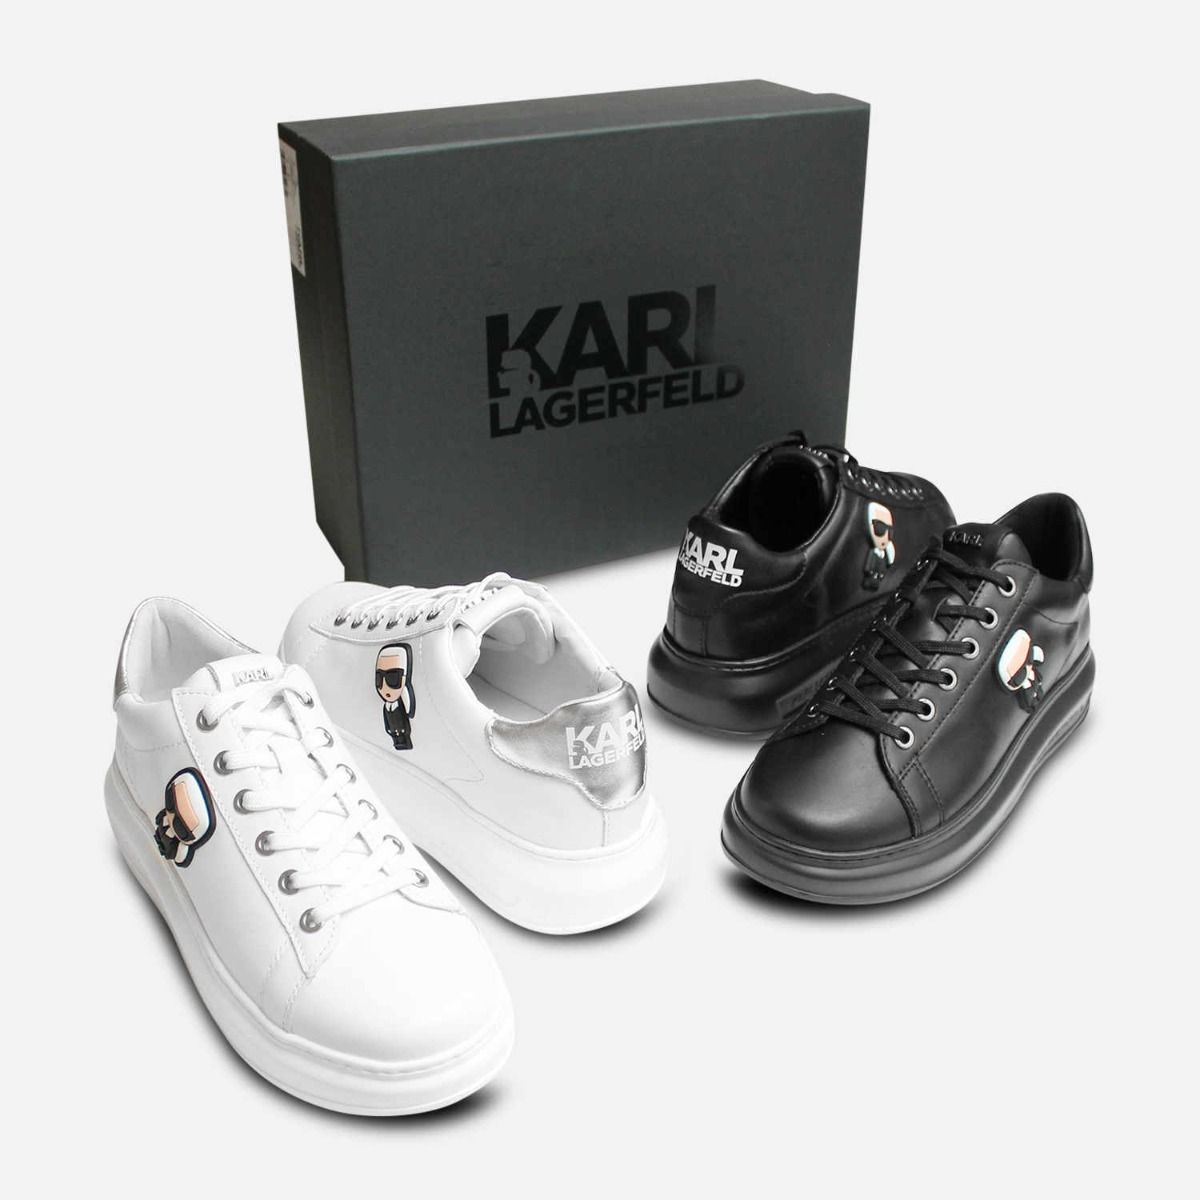 karl lagerfeld sale shoes